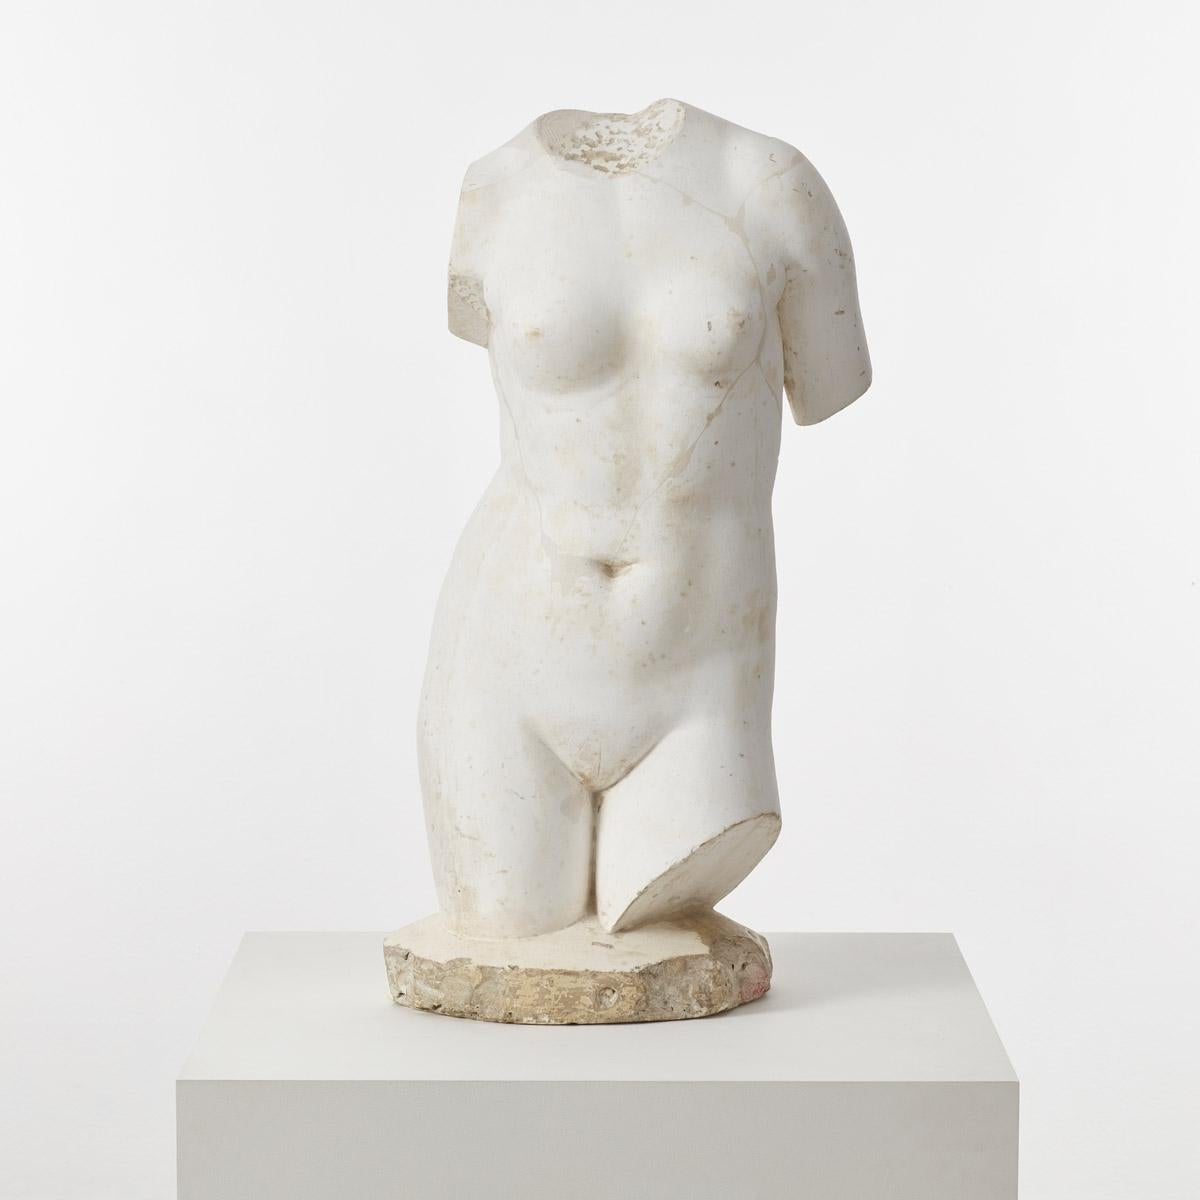 A striking plaster cast of a classical female torso, reputedly reclaimed from a museum. The surface has an antiquated finish, with signs of wear, repairs, chips and marks.